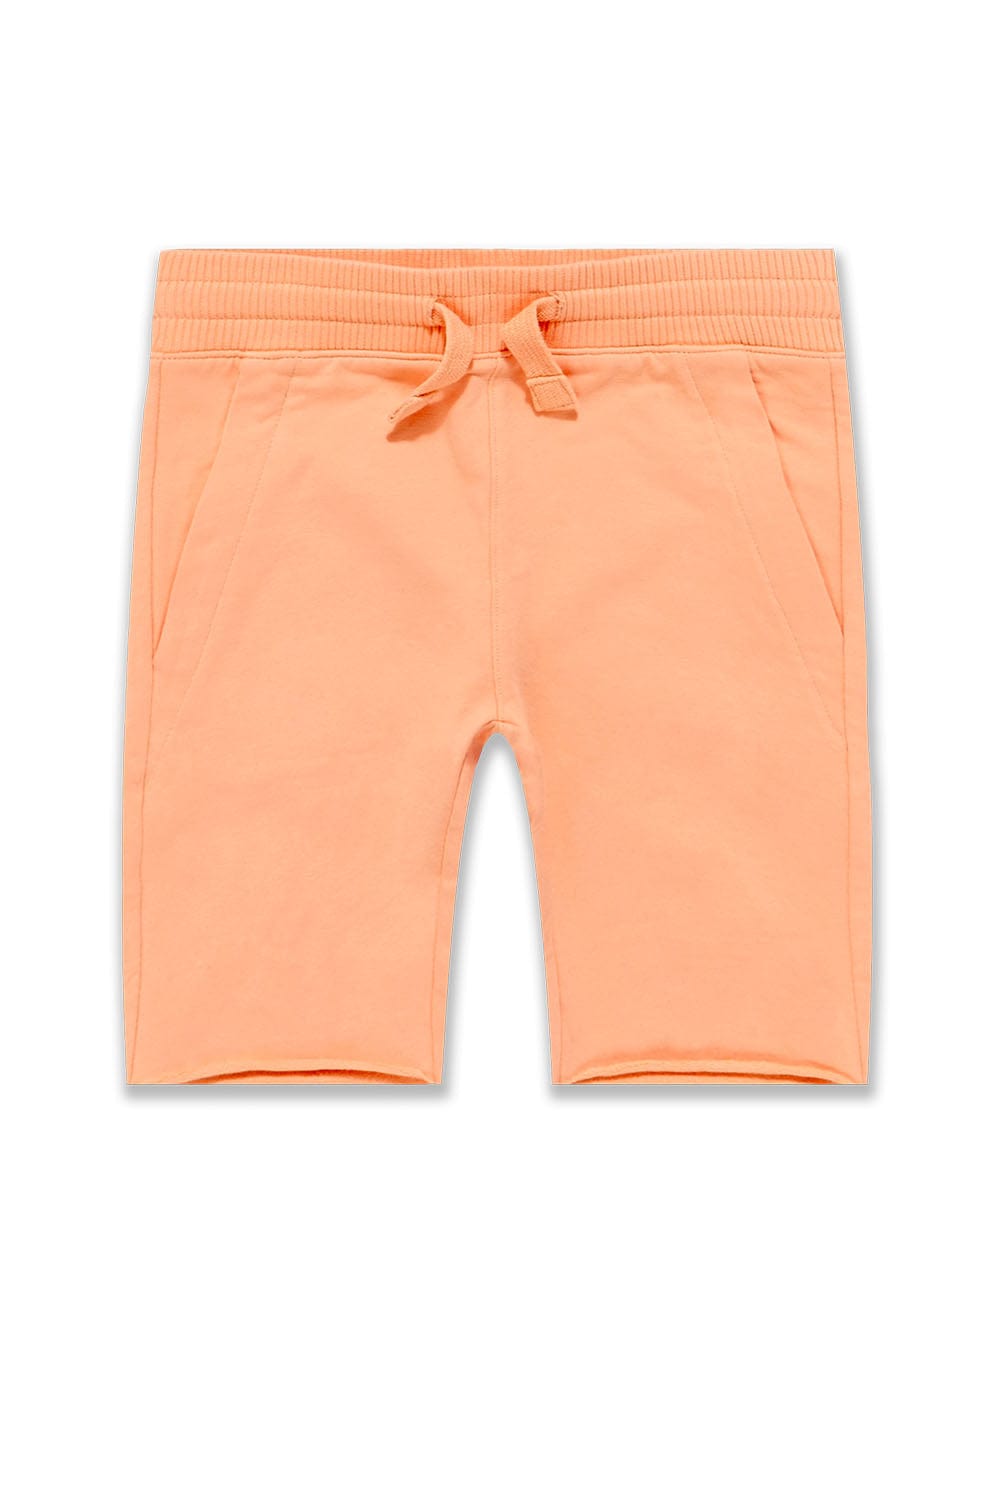 JC Kids Kids Palma French Terry Shorts (Exclusive Colors) Peach / 2